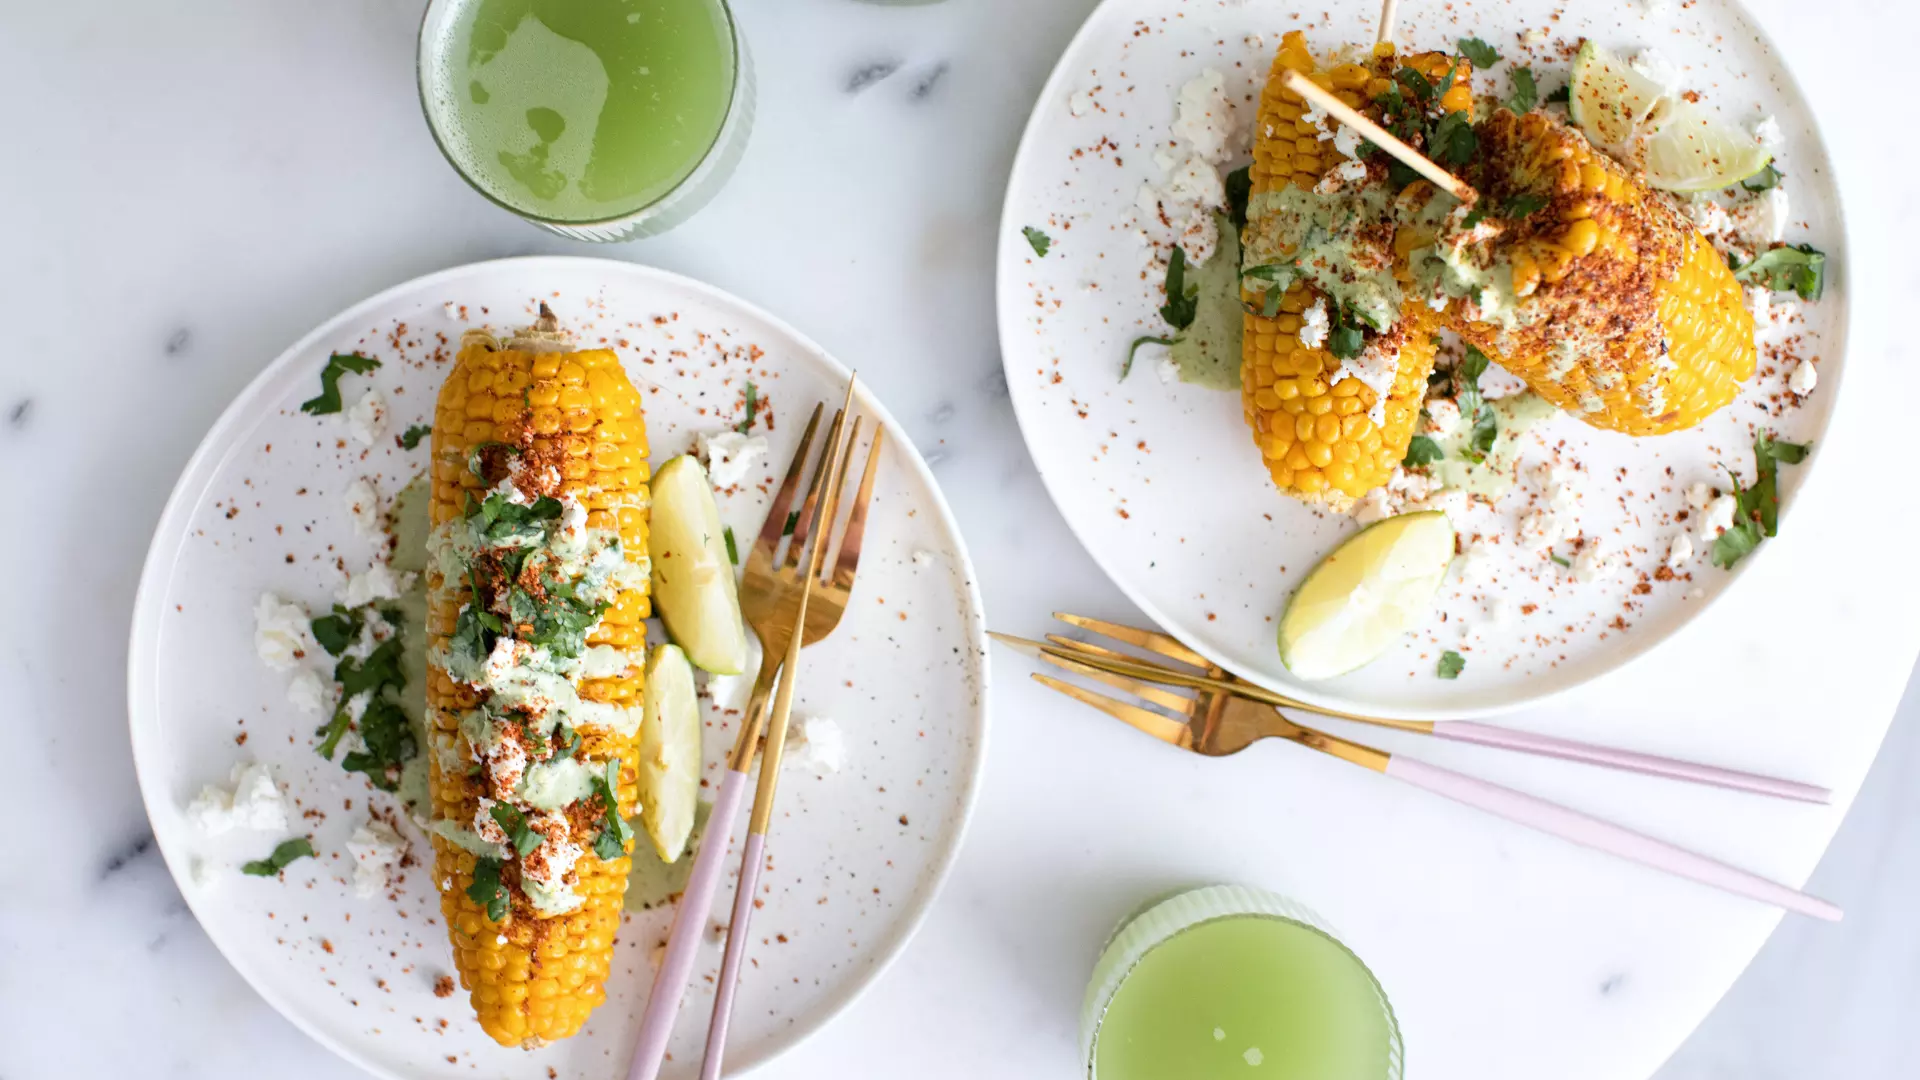 5 a-maize-ing recipes that will sort out your monsoon munching sessions